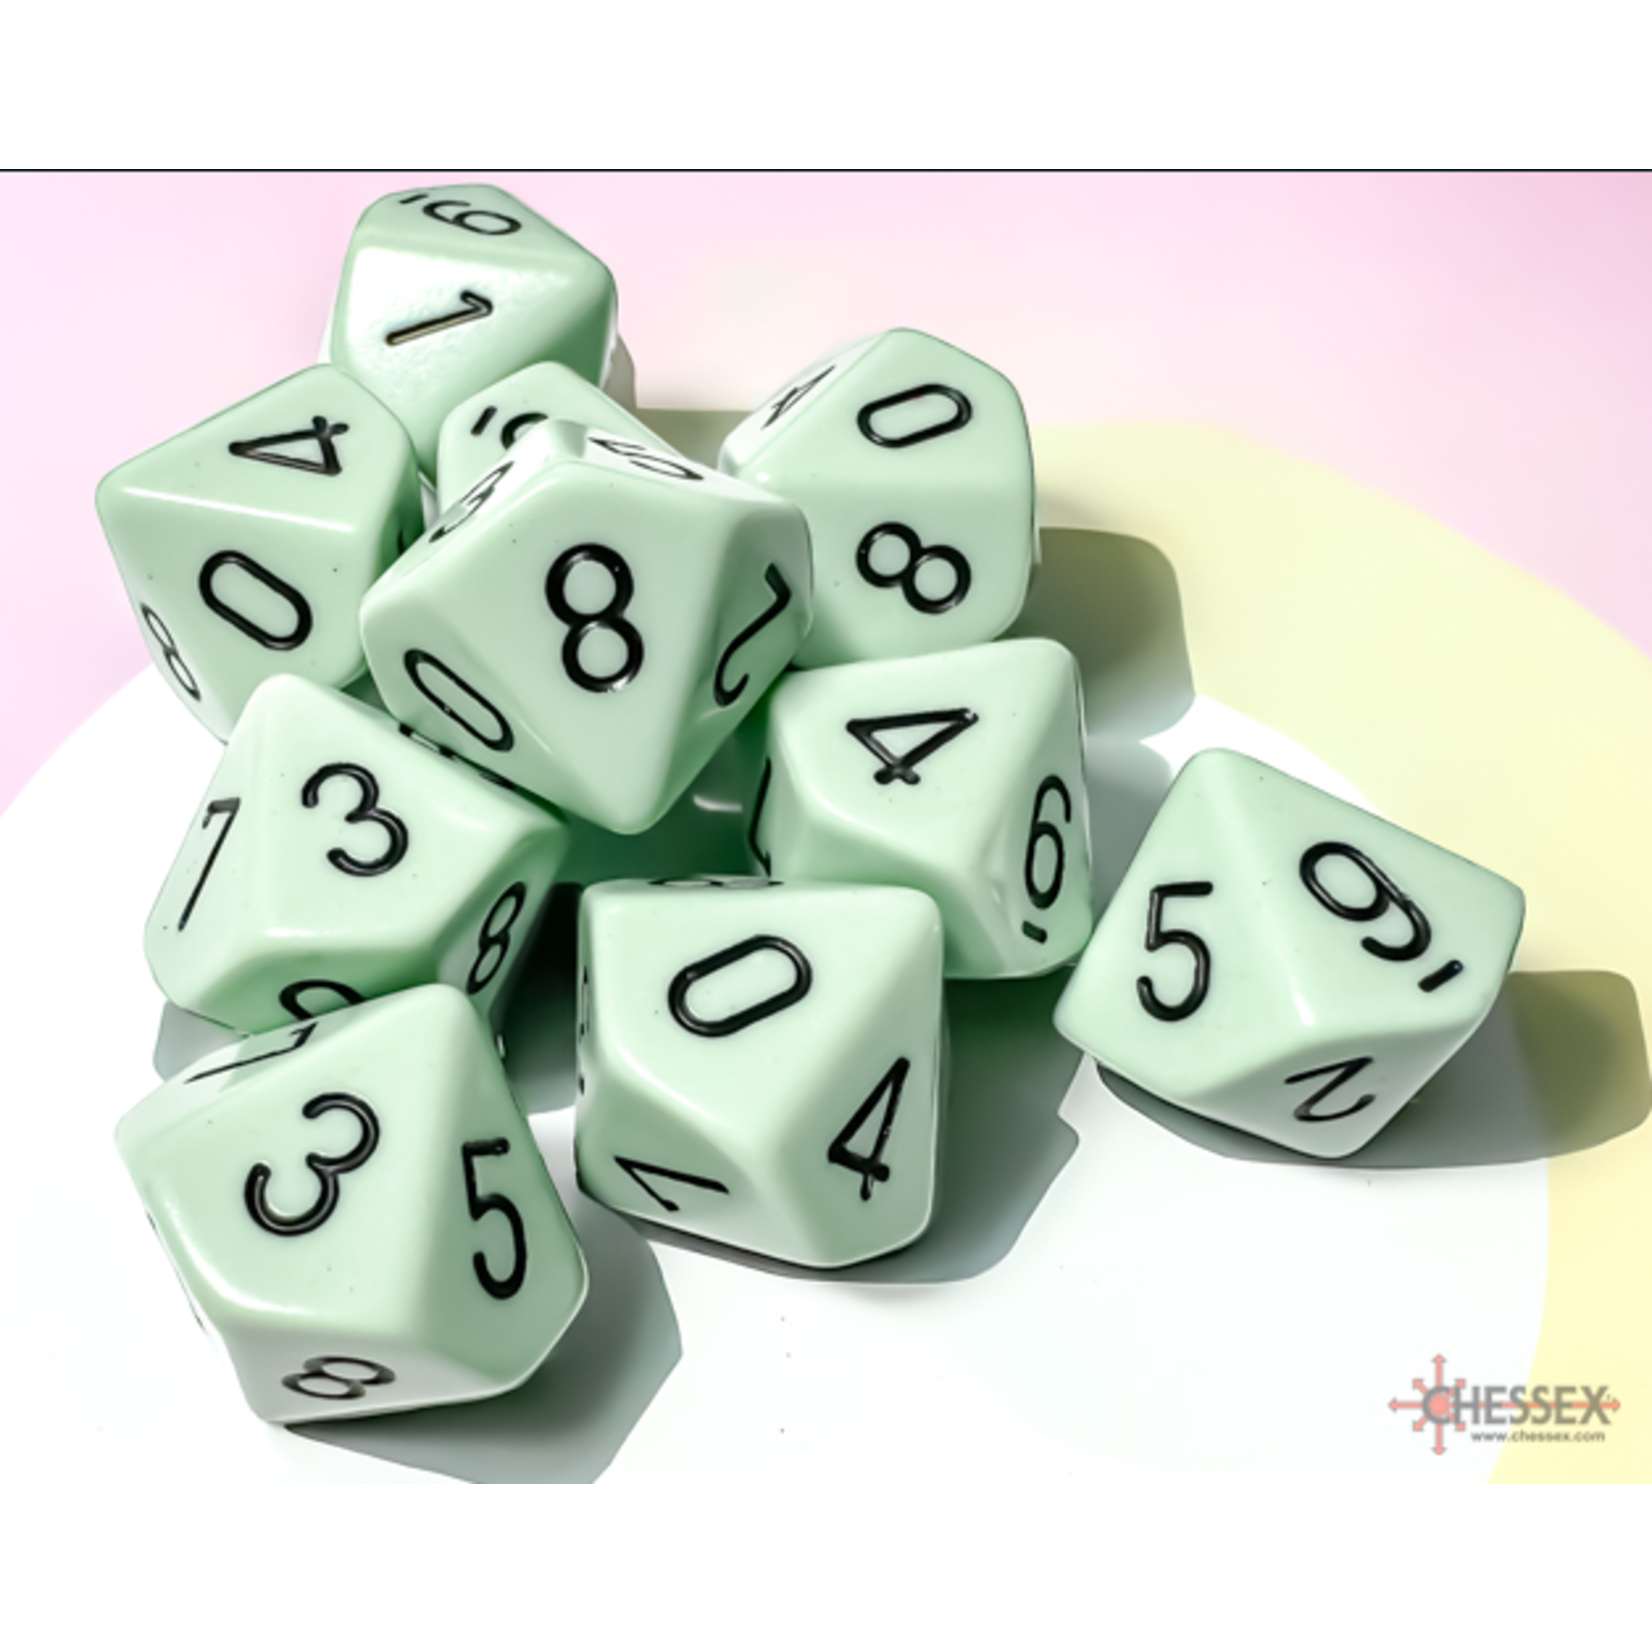 Chessex Opaque Pastel Green/Black d10s